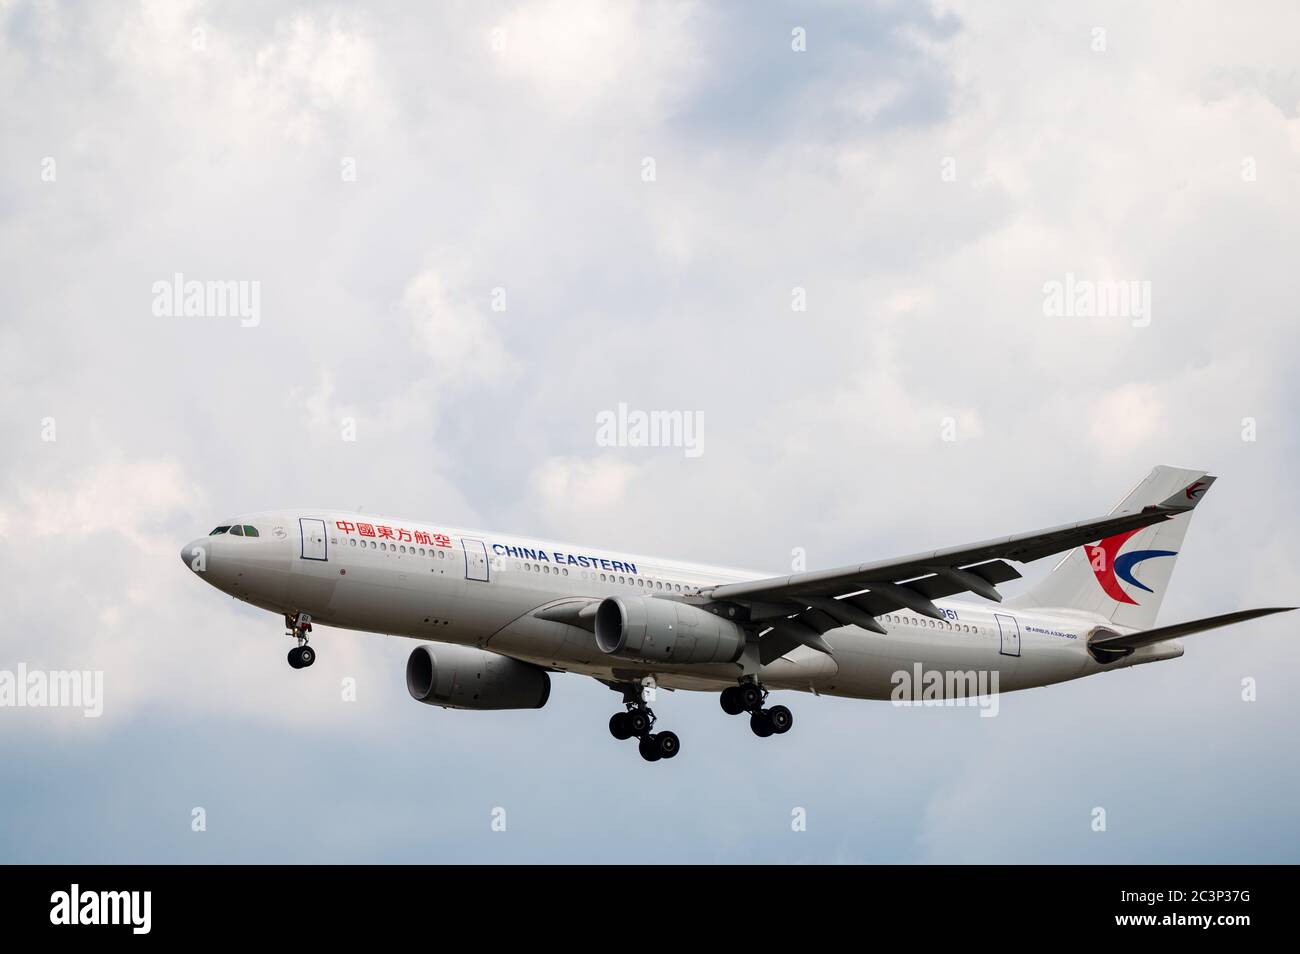 China Eastern Airlines Airbus A330-200 B-5961 approaching to land at EDDF Frankfurt Airport in Germany Stock Photo